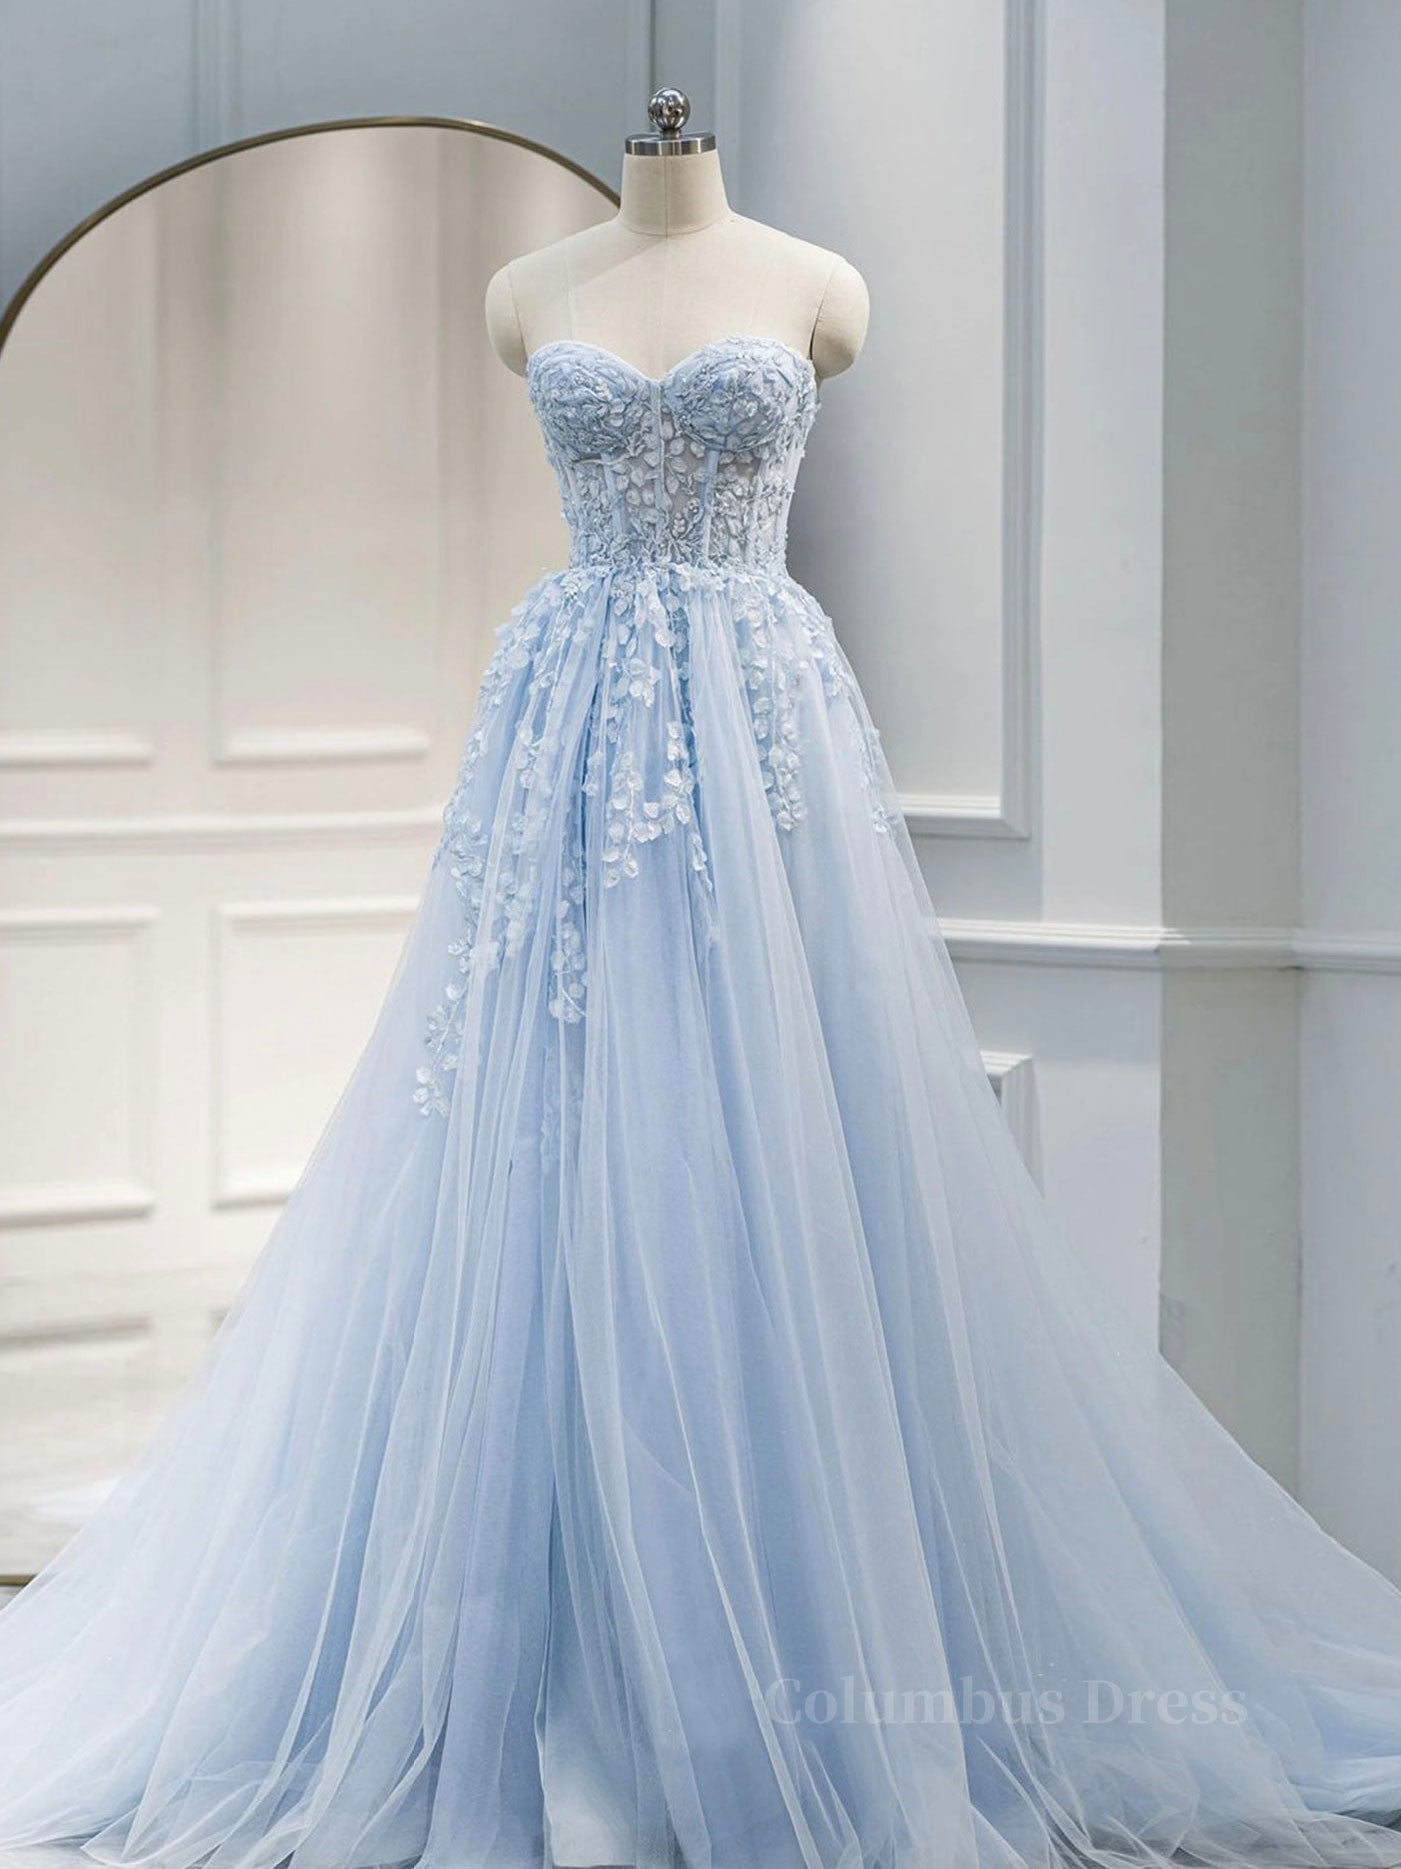 Prom Dress Sleeves, Blue A line tulle lace long prom dress blue lace formal dress